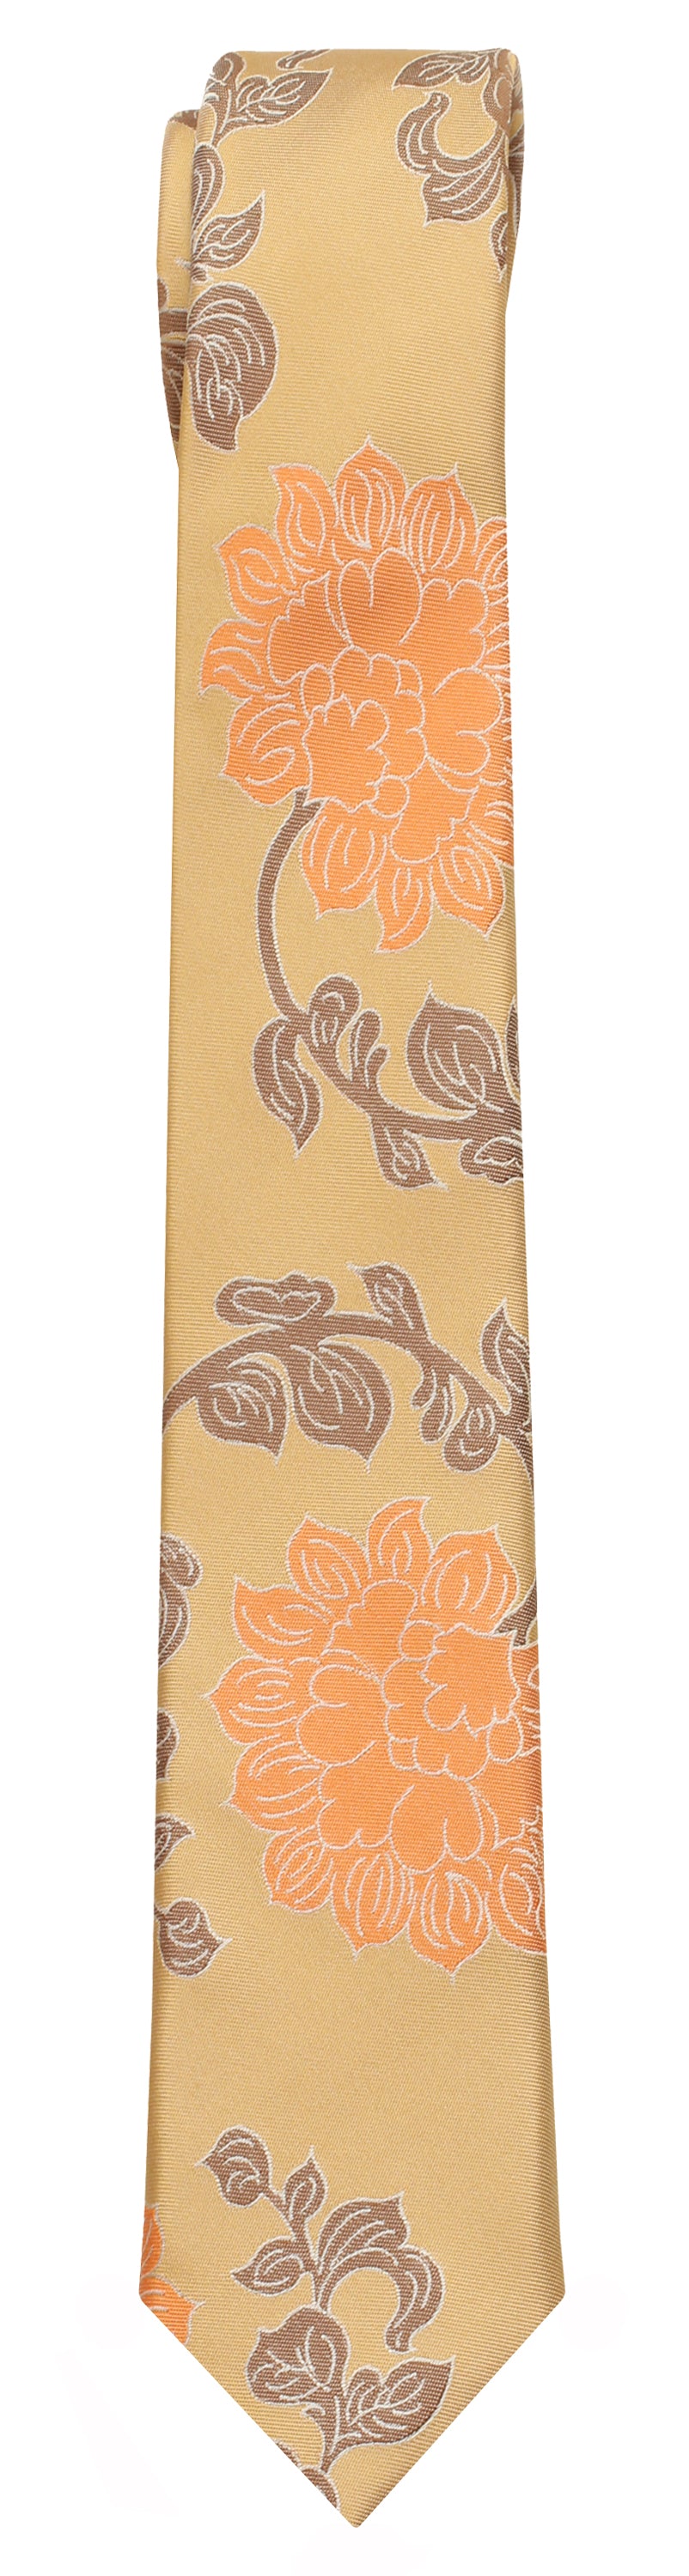 Mimi Fong Lotus Tie in Gold